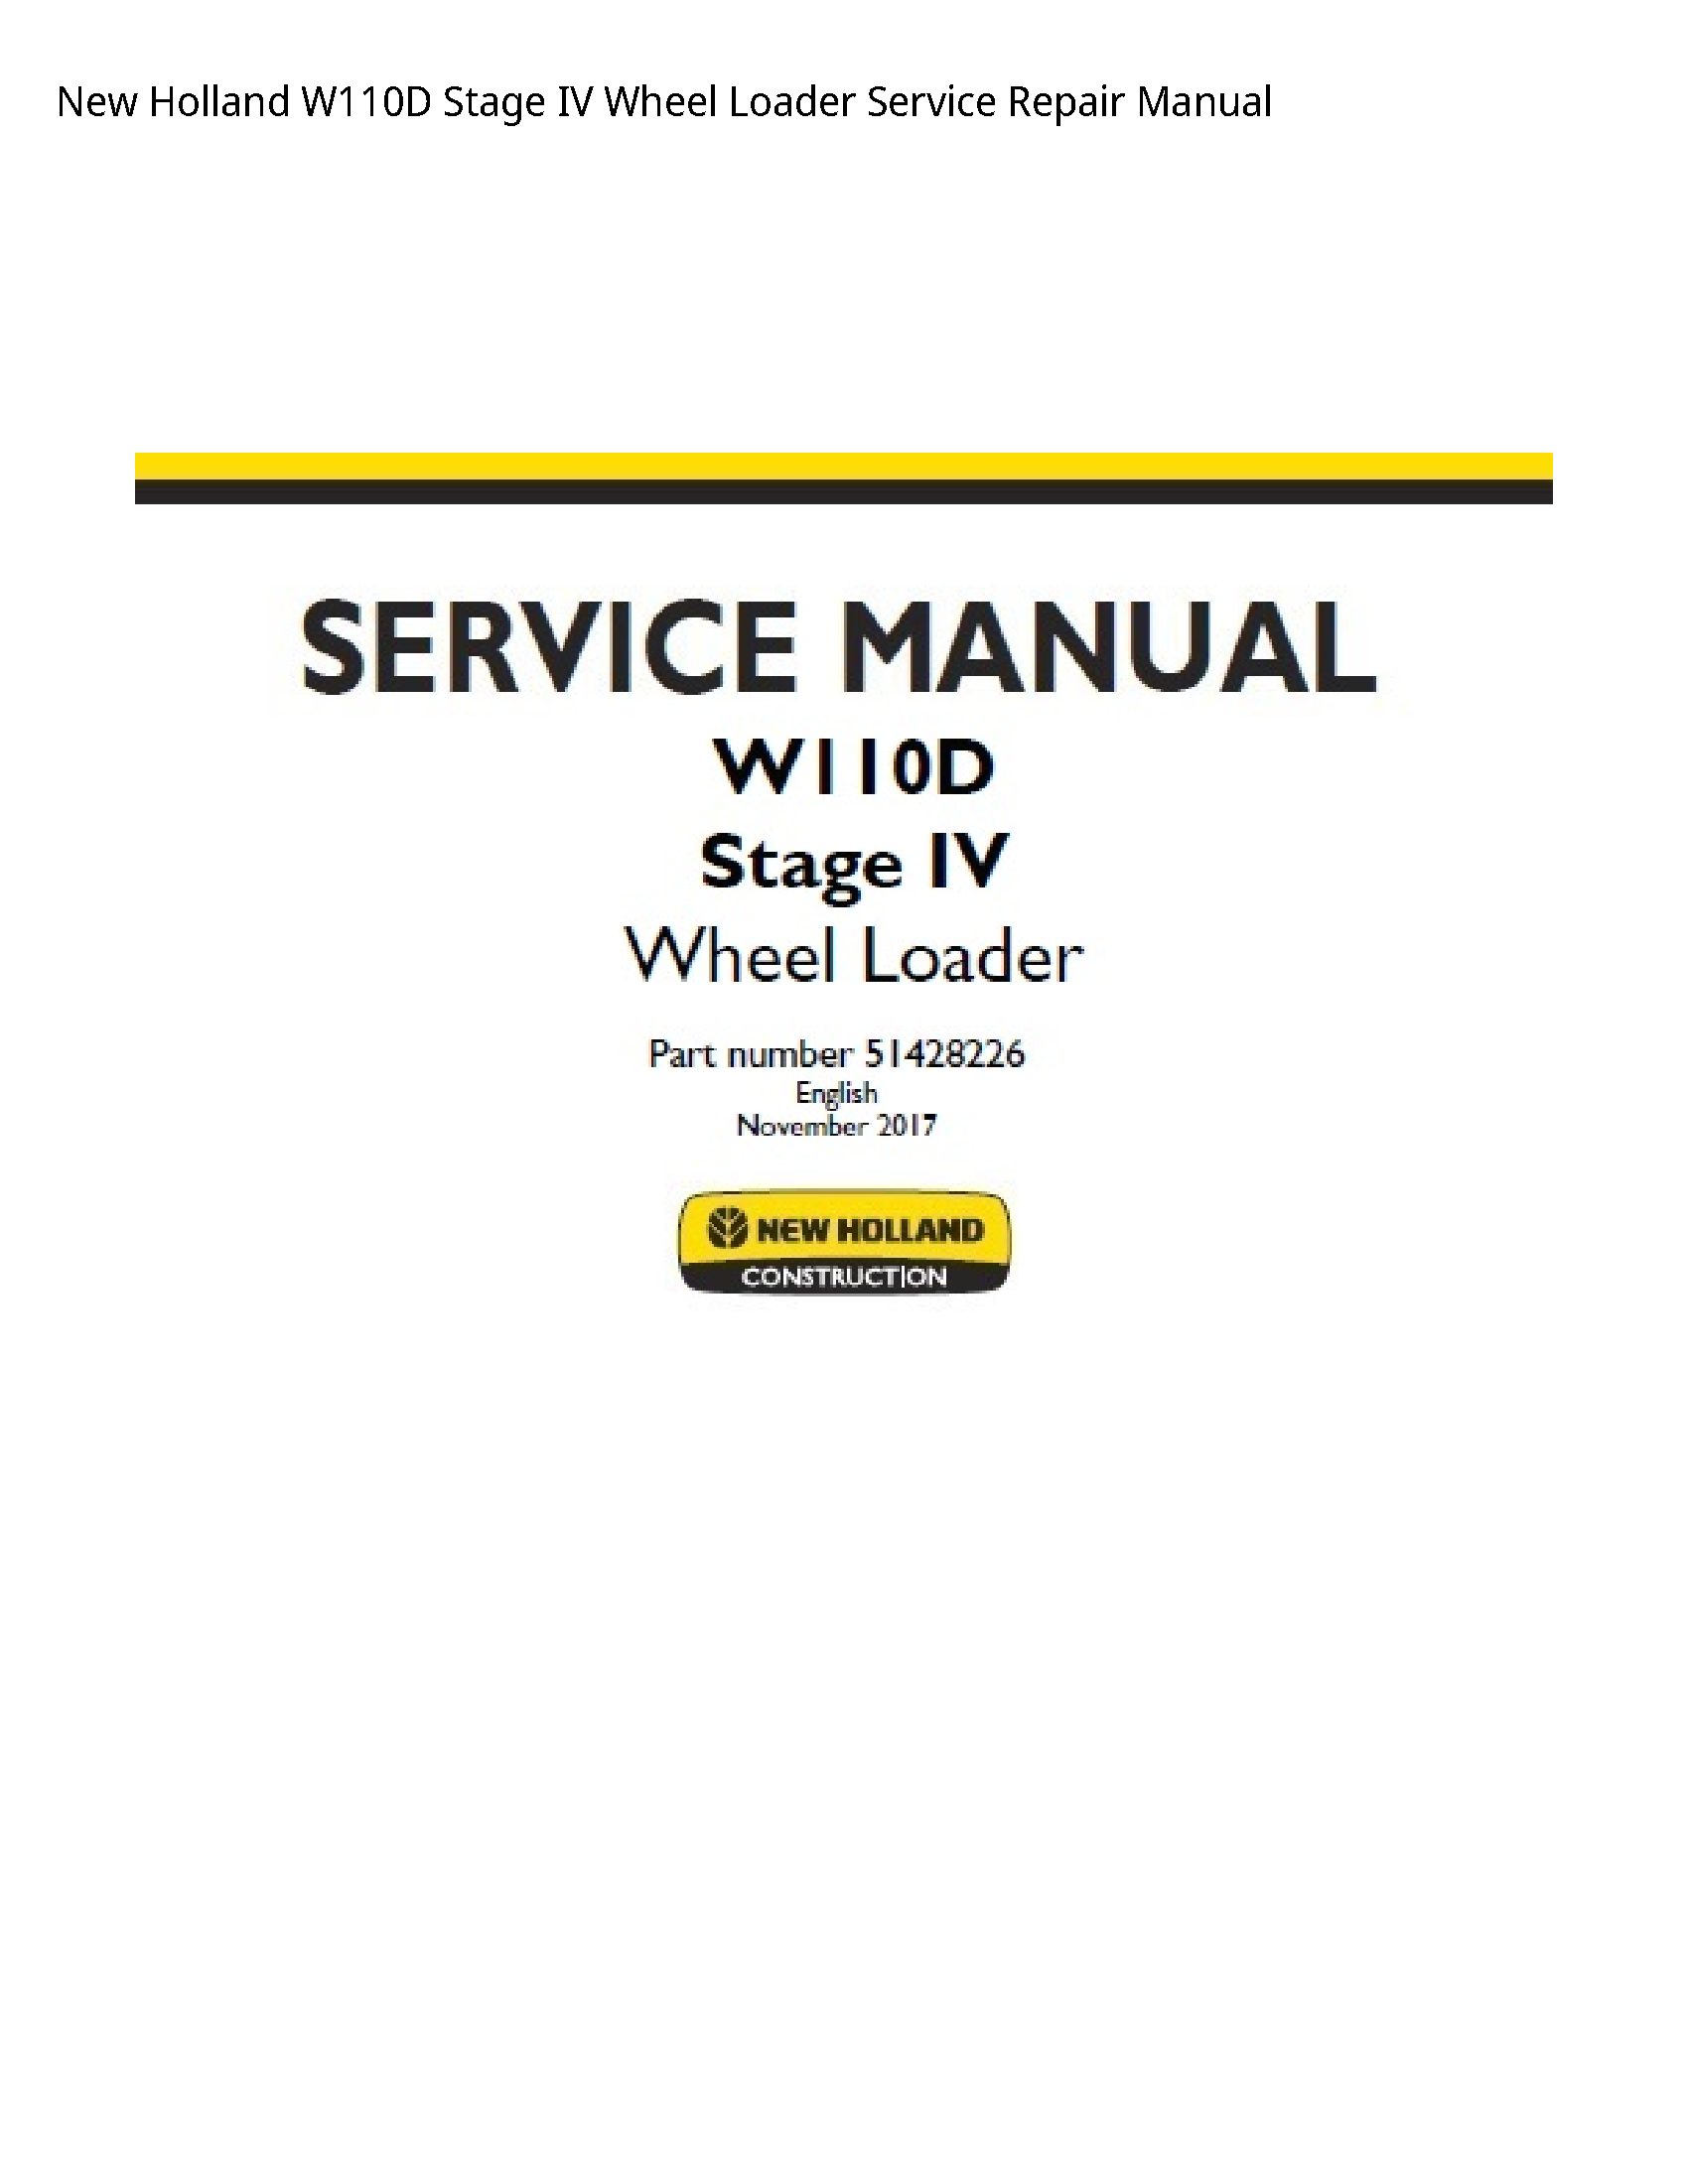 New Holland W110D Stage IV Wheel Loader manual